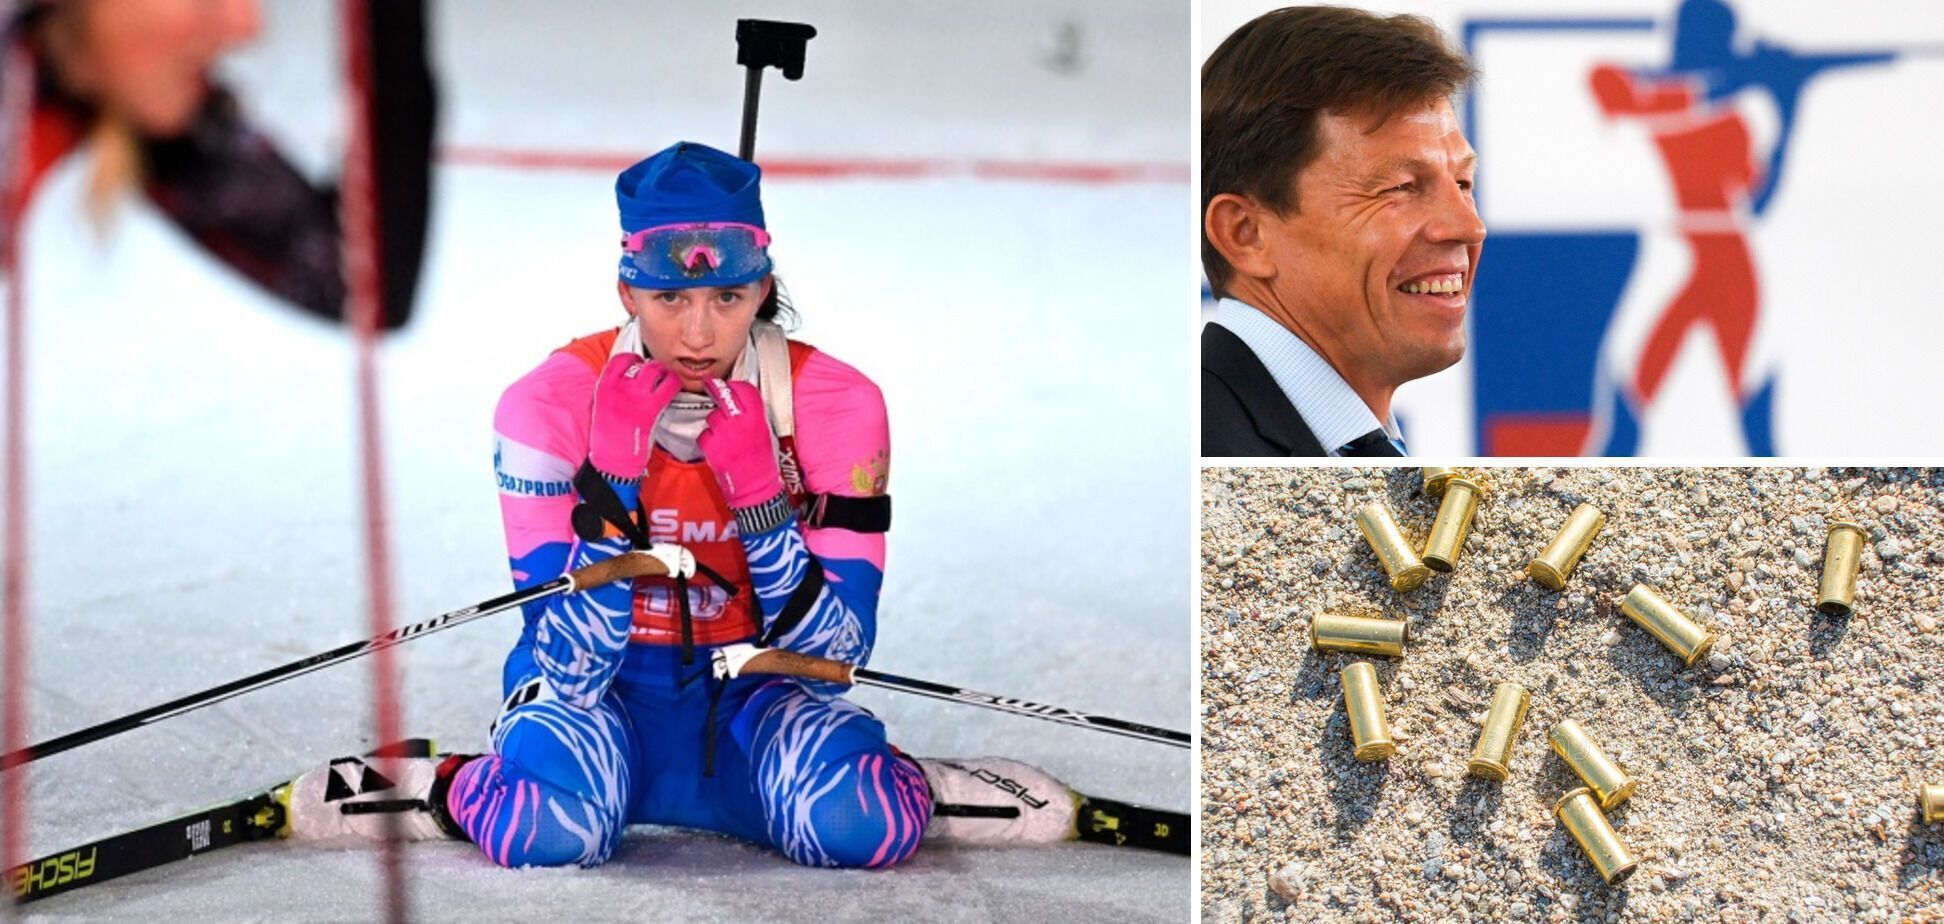 ''There is no reason to give back''. IBU has pointed out Russia's place